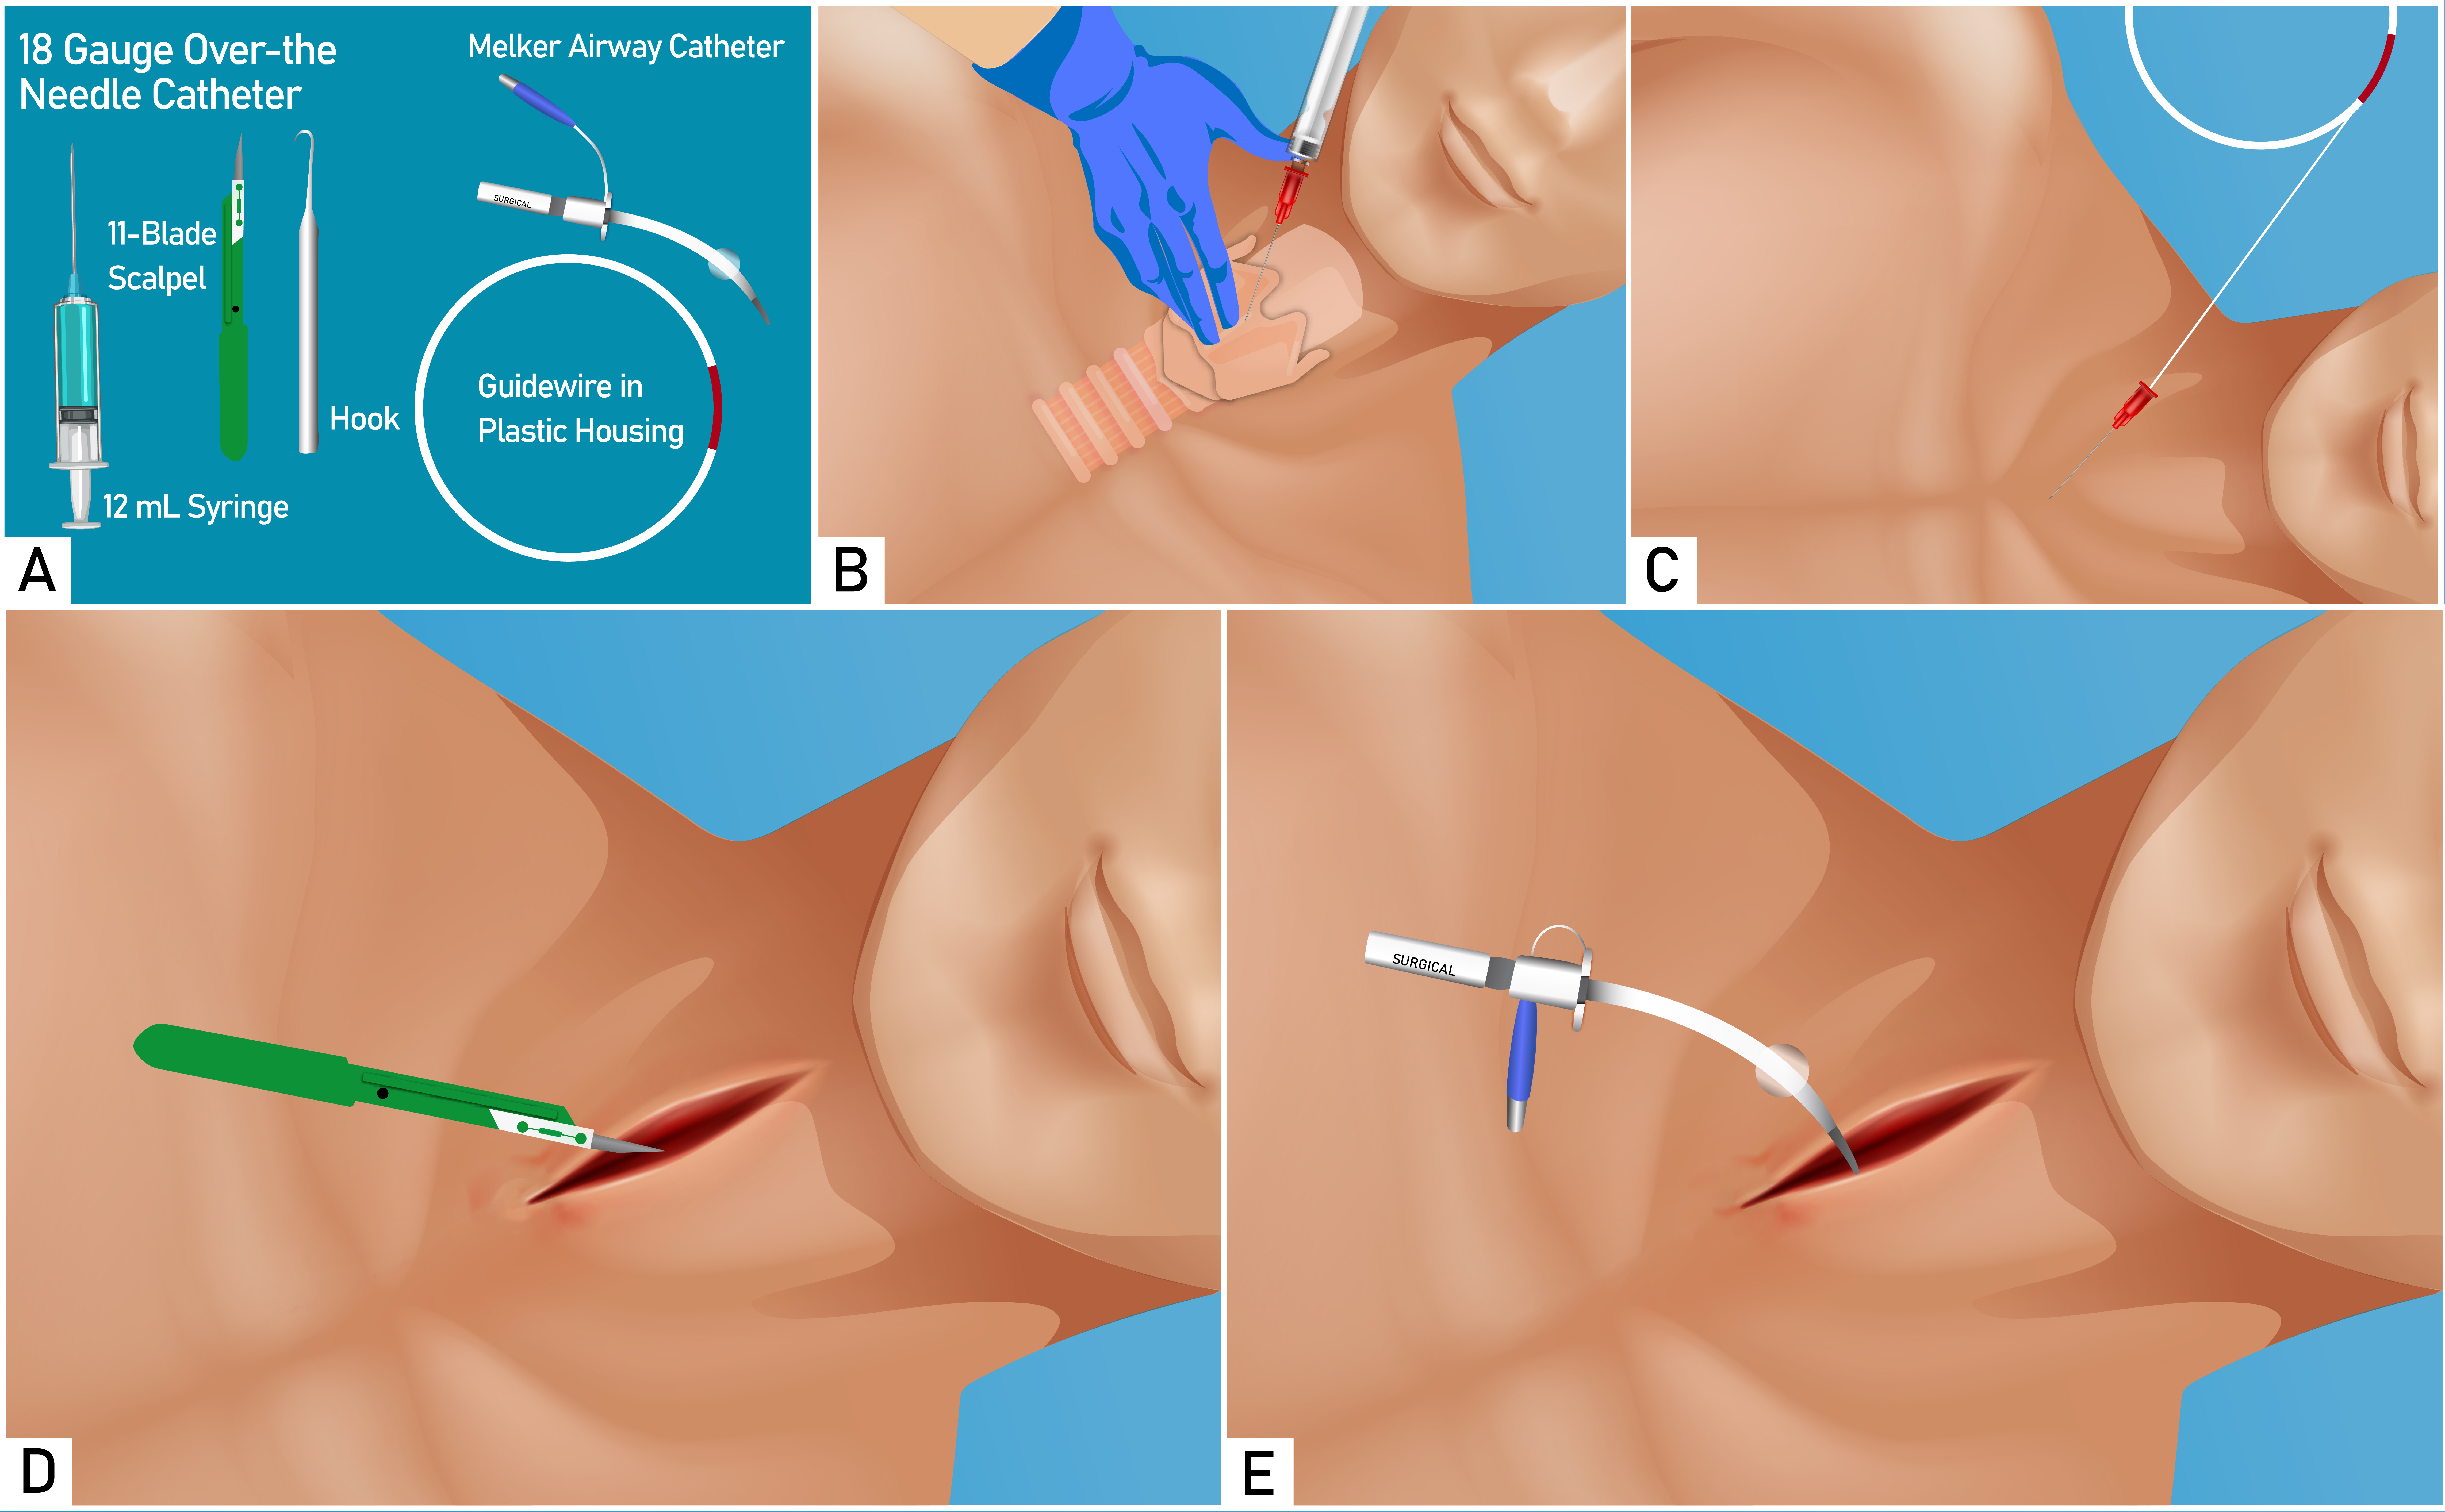 This image illustrates the equipment required for cricothyroidotomy and stepwise approach to perform the procedure.